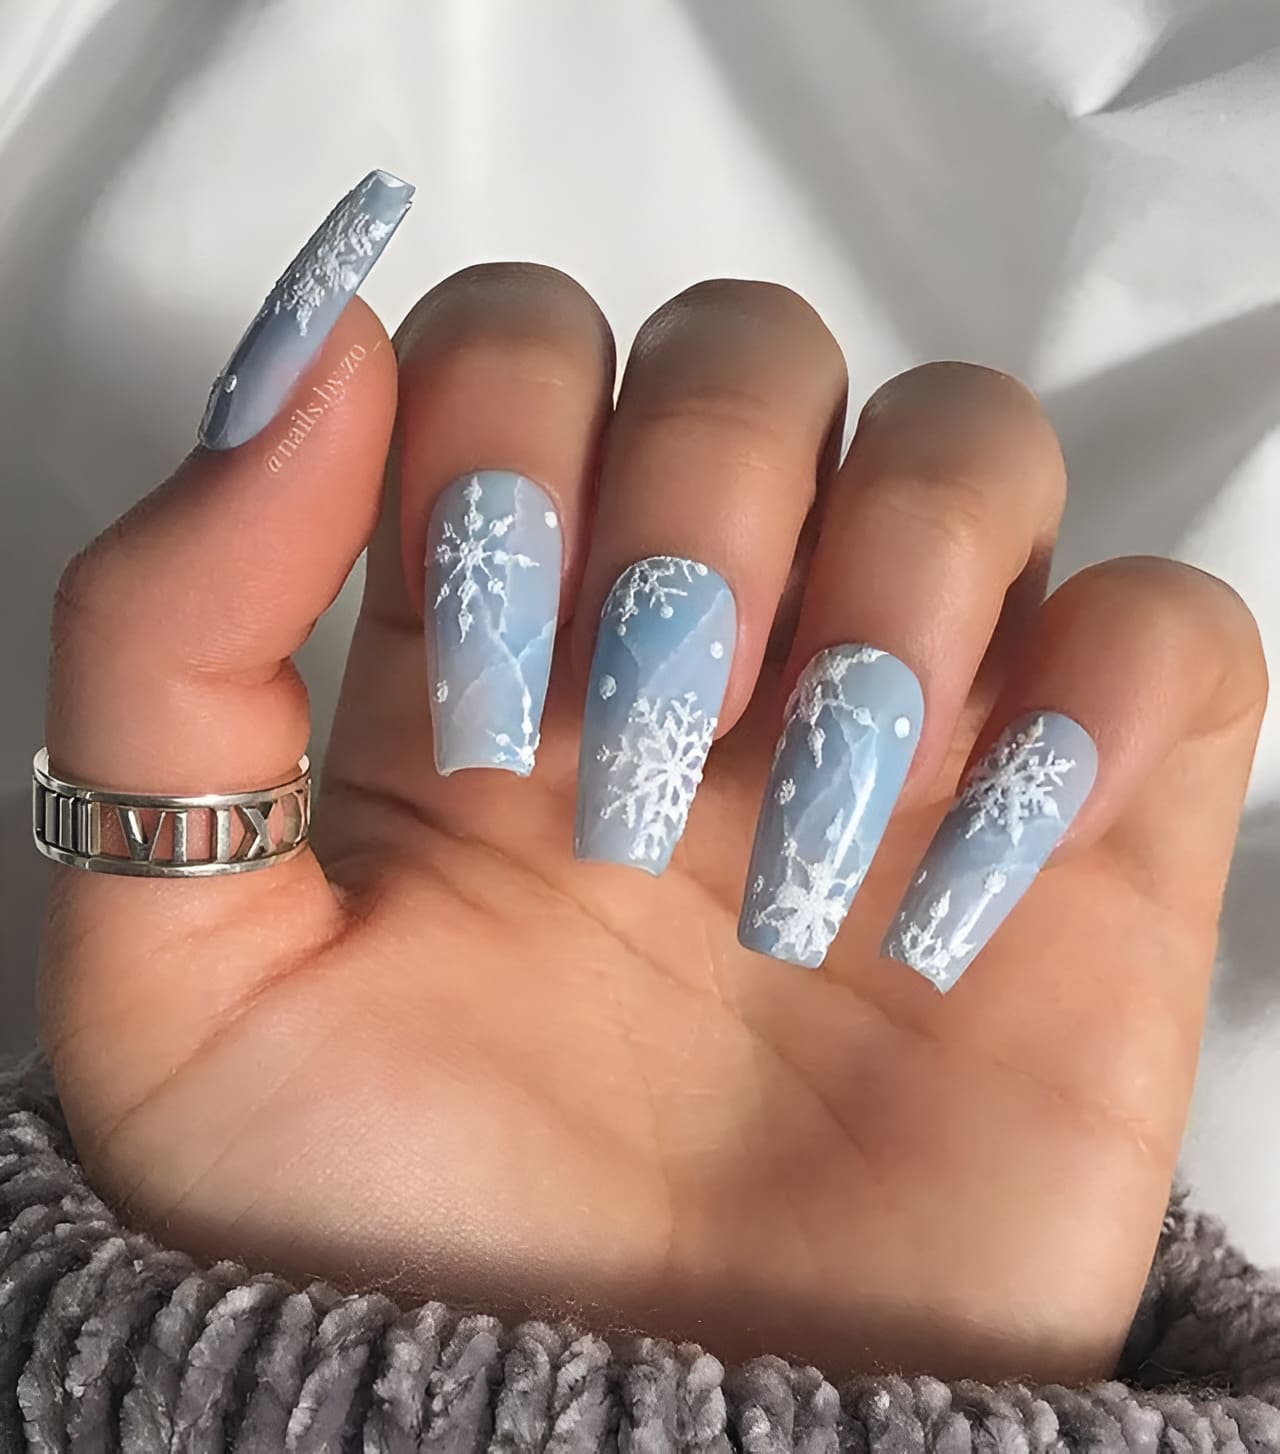 Icy Festive Manicure